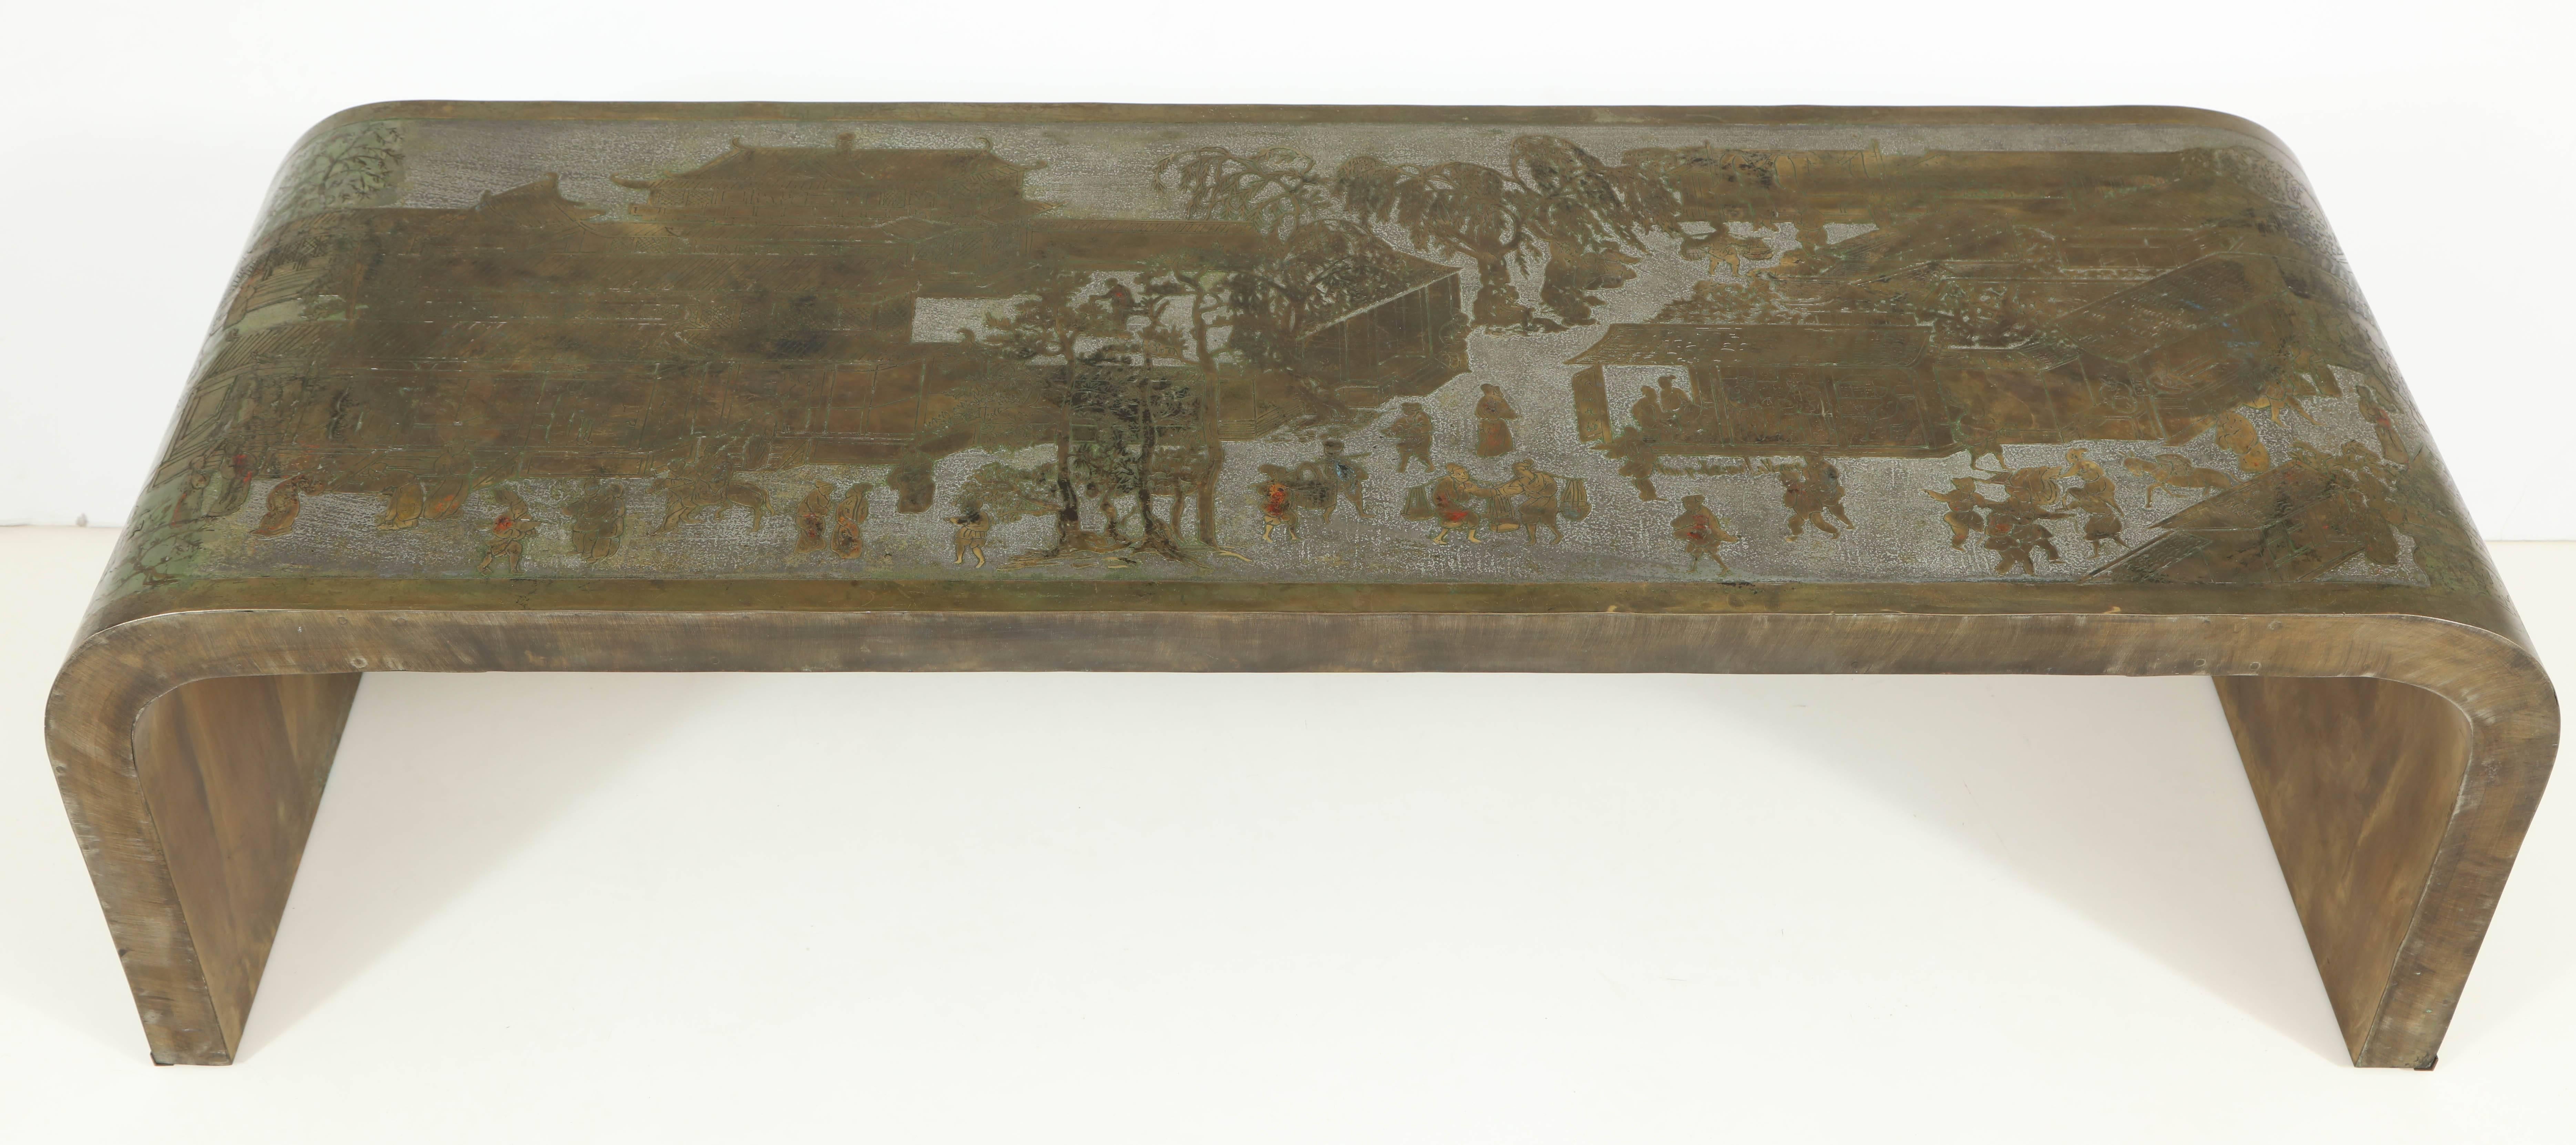 Exquisite "Spring Festival" etched bronze and pewter waterfall style coffee table with polychrome accents. Table features scenes of daily life and has a great vintage patina.